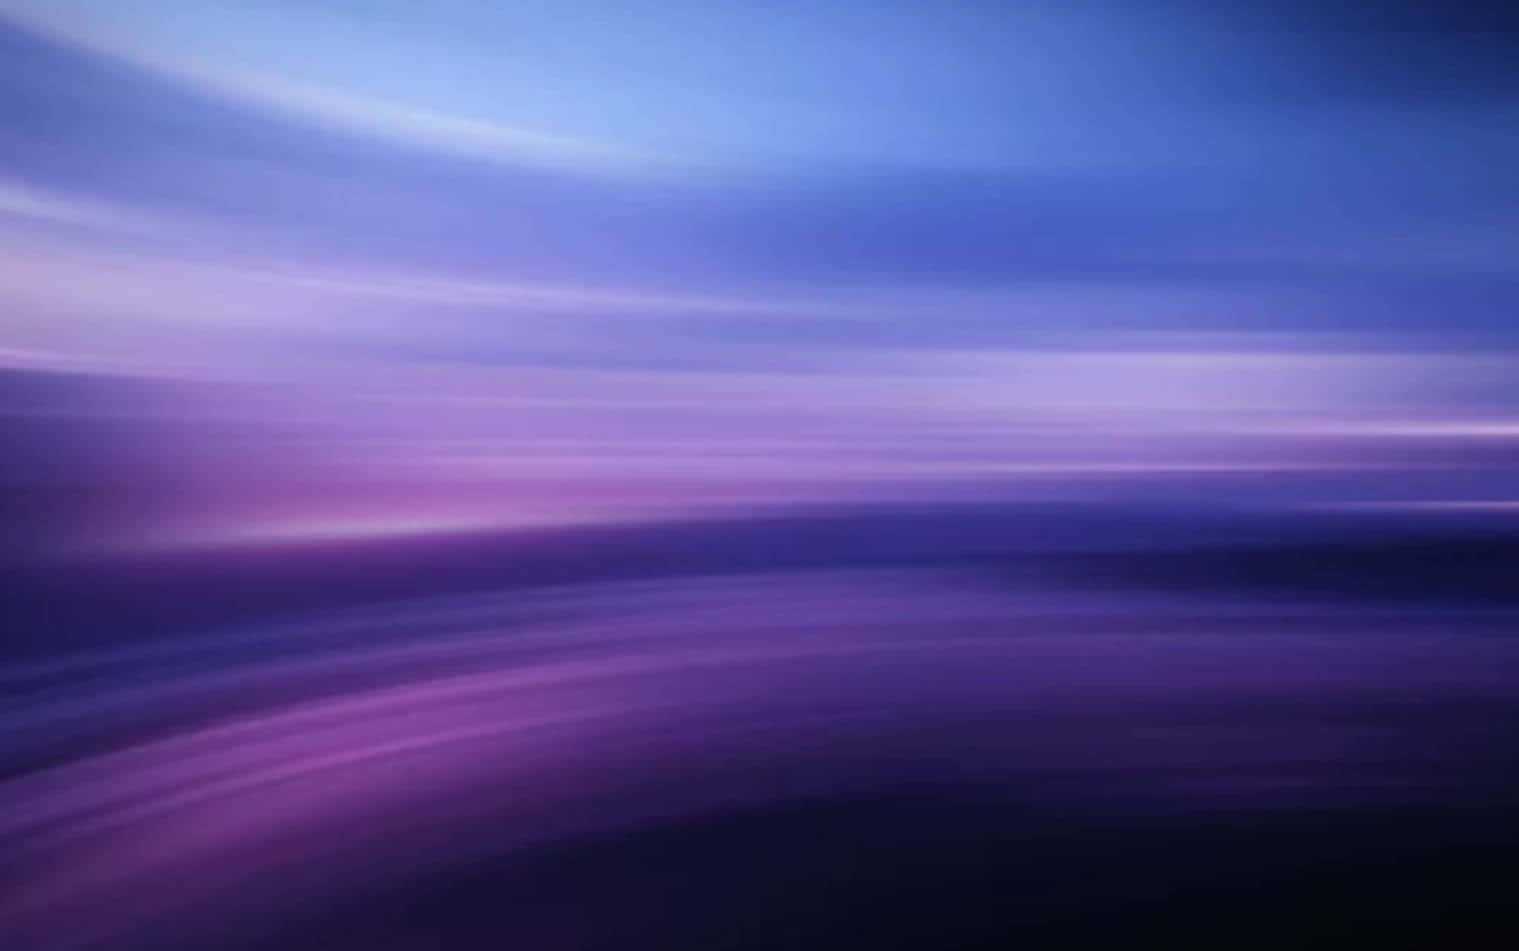 Purple And Blue Abstract Background